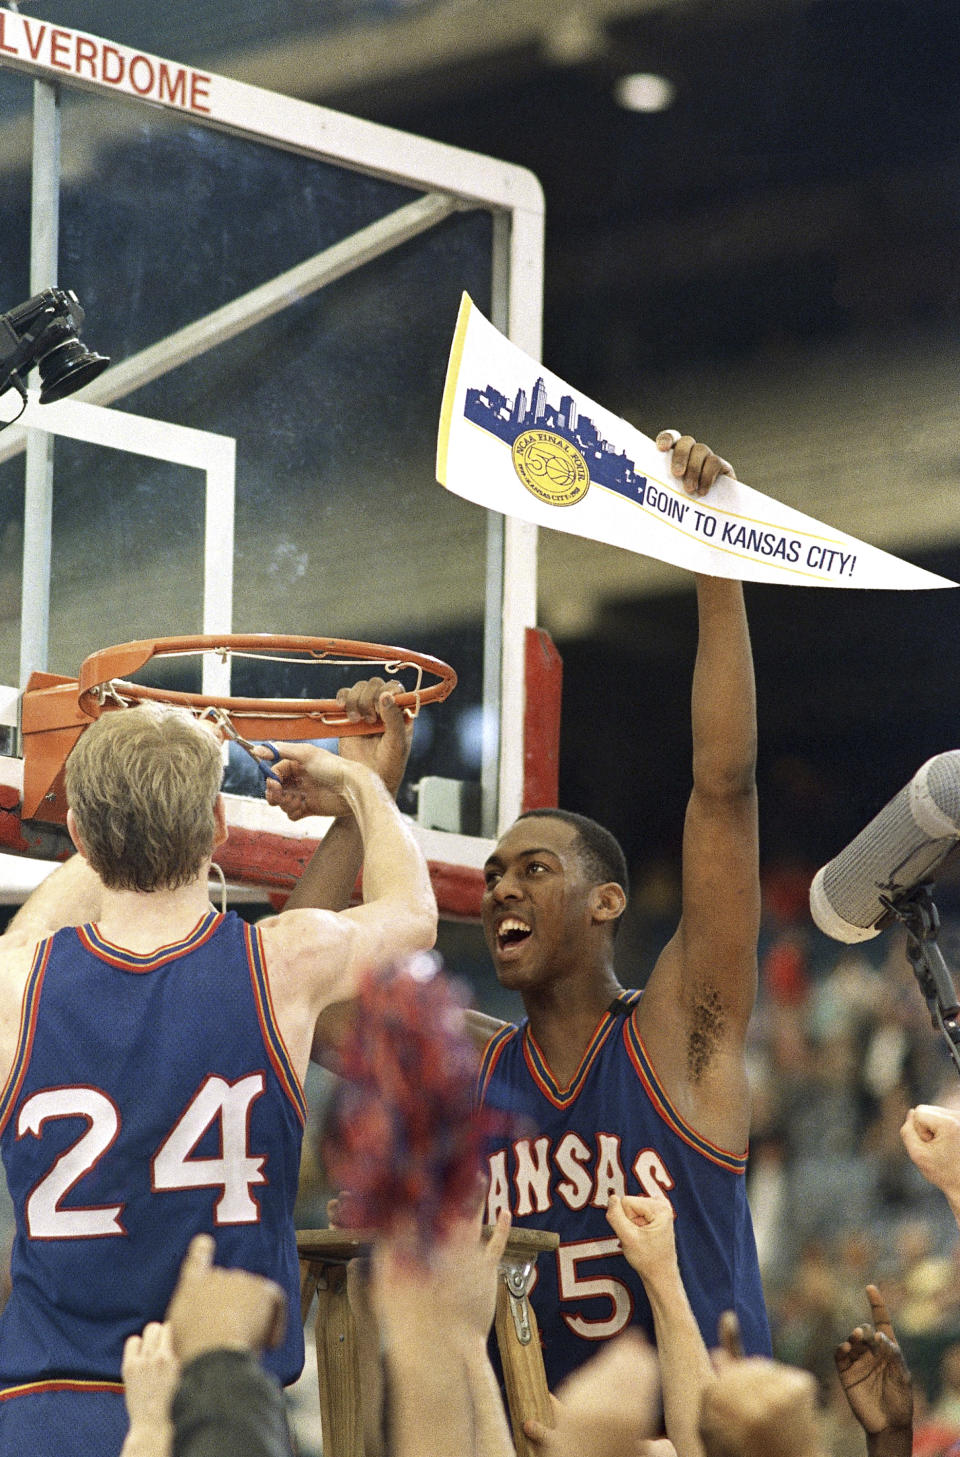 FILE - Kansas' Danny Manning hoists a banner aloft as teammate Chris Piper cuts the net after the Jayhawks beat Kansas State 71-58 to win the Midwest Regional Final Sunday, March 27, 1988, at the Pontiac Silverdome in Pontiac, Mich. Once the Jayhawks got to the NCAA Tournament, Manning carried them to their second national title.(AP Photo/Al Behrman, File)